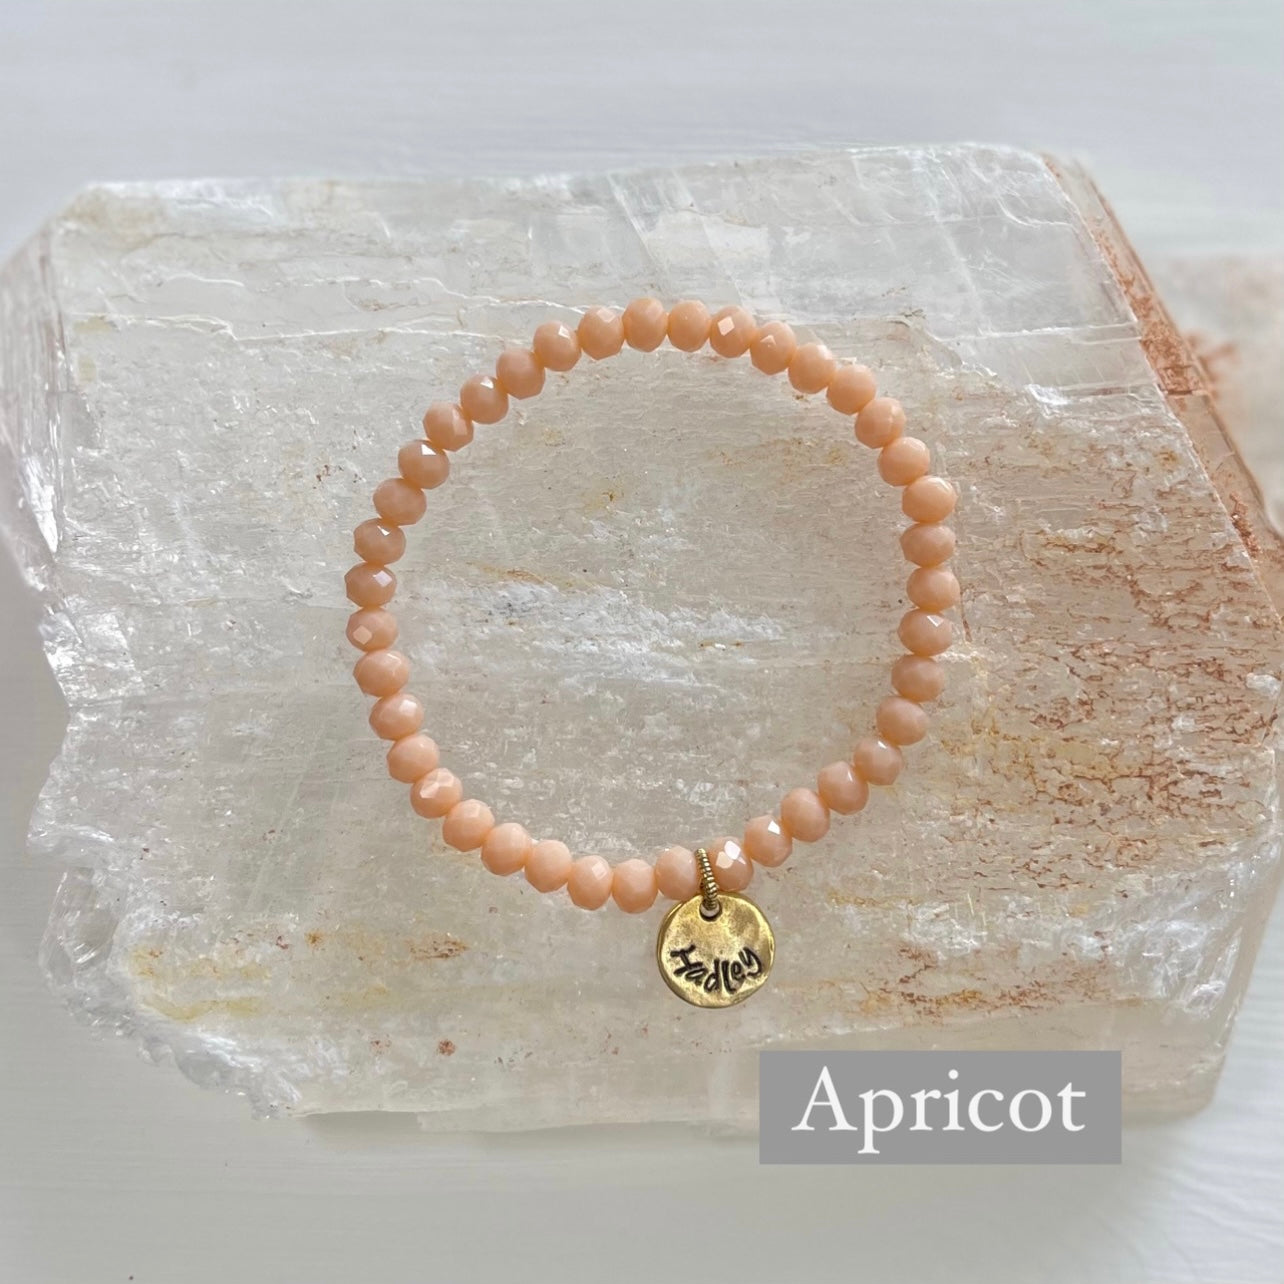 Personalized Crystal Stack Apricot